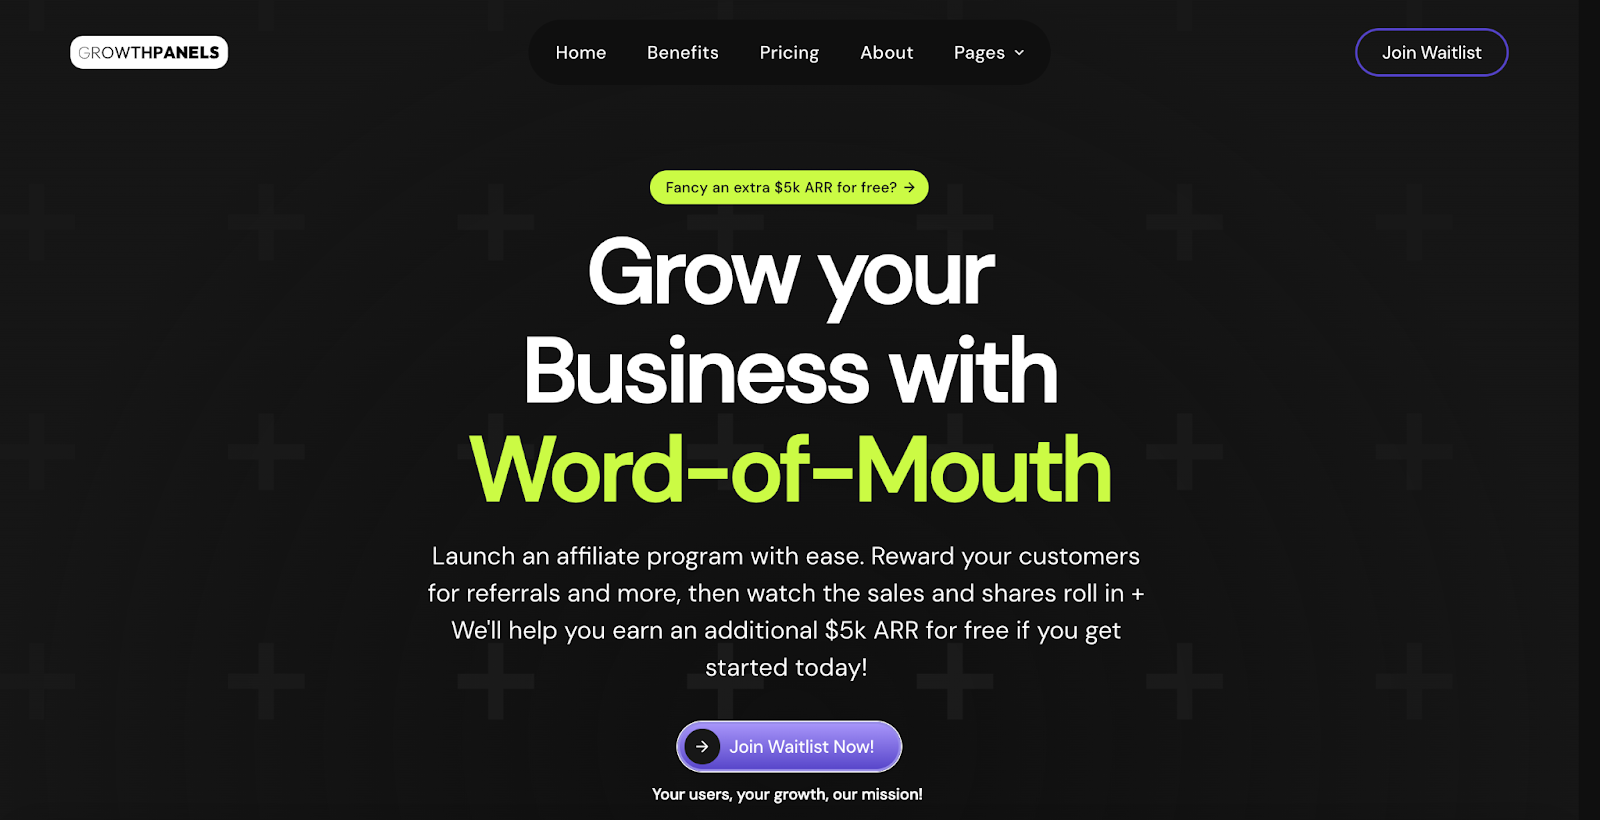 The GrowthPanels homepage that claims to 'grow your business with word-of-mouth.'